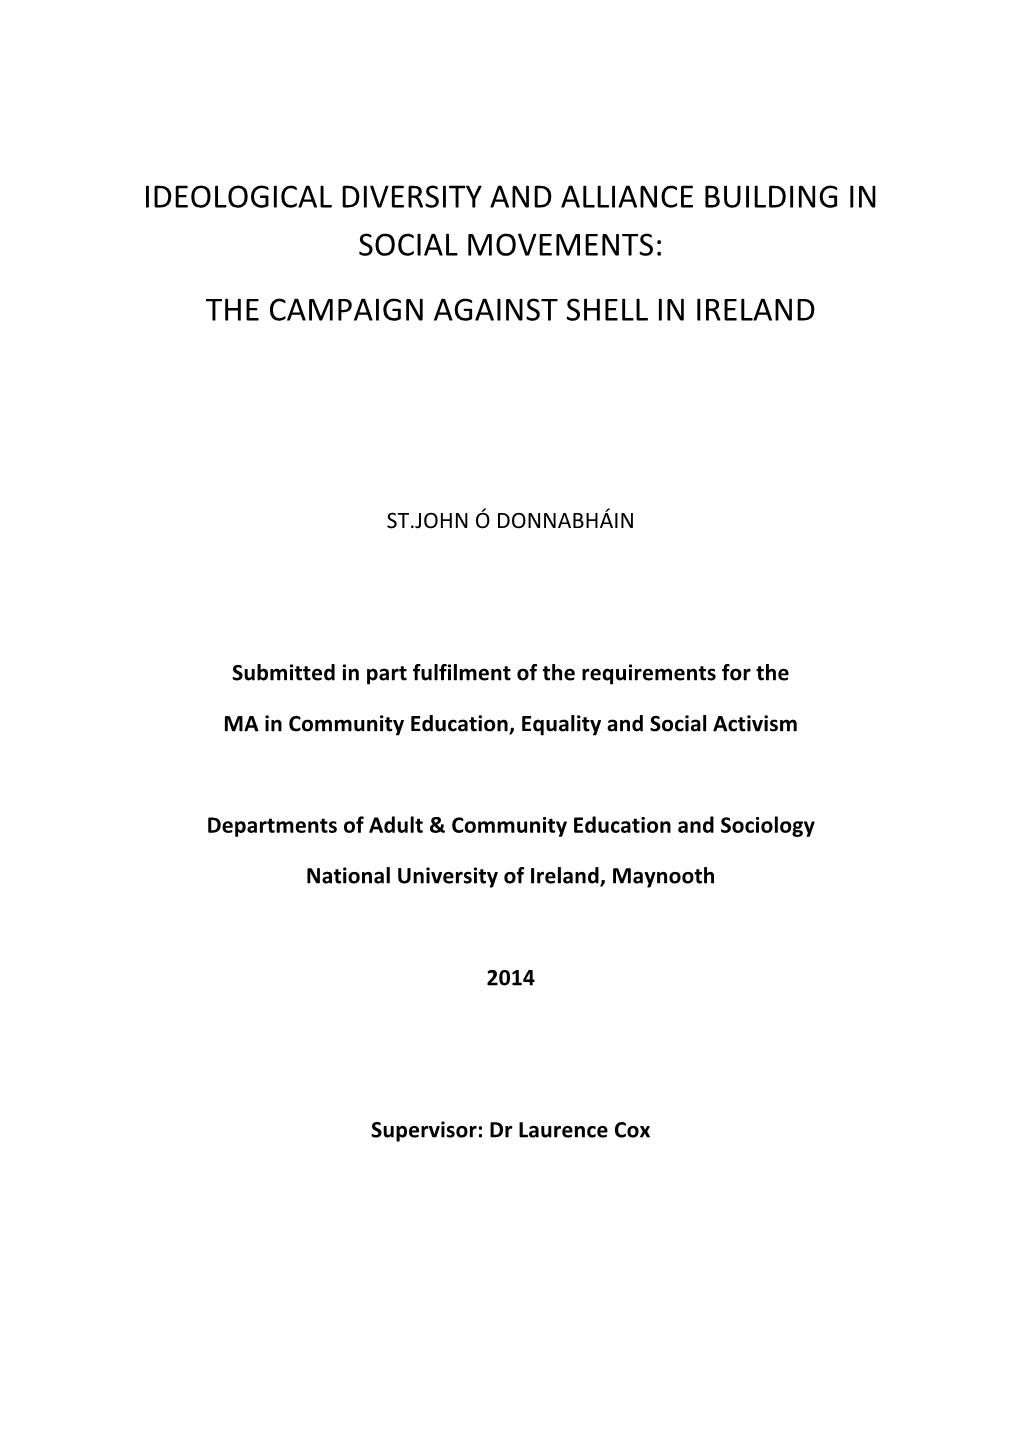 Ideological Diversity and Alliance Building in Social Movements: the Campaign Against Shell in Ireland